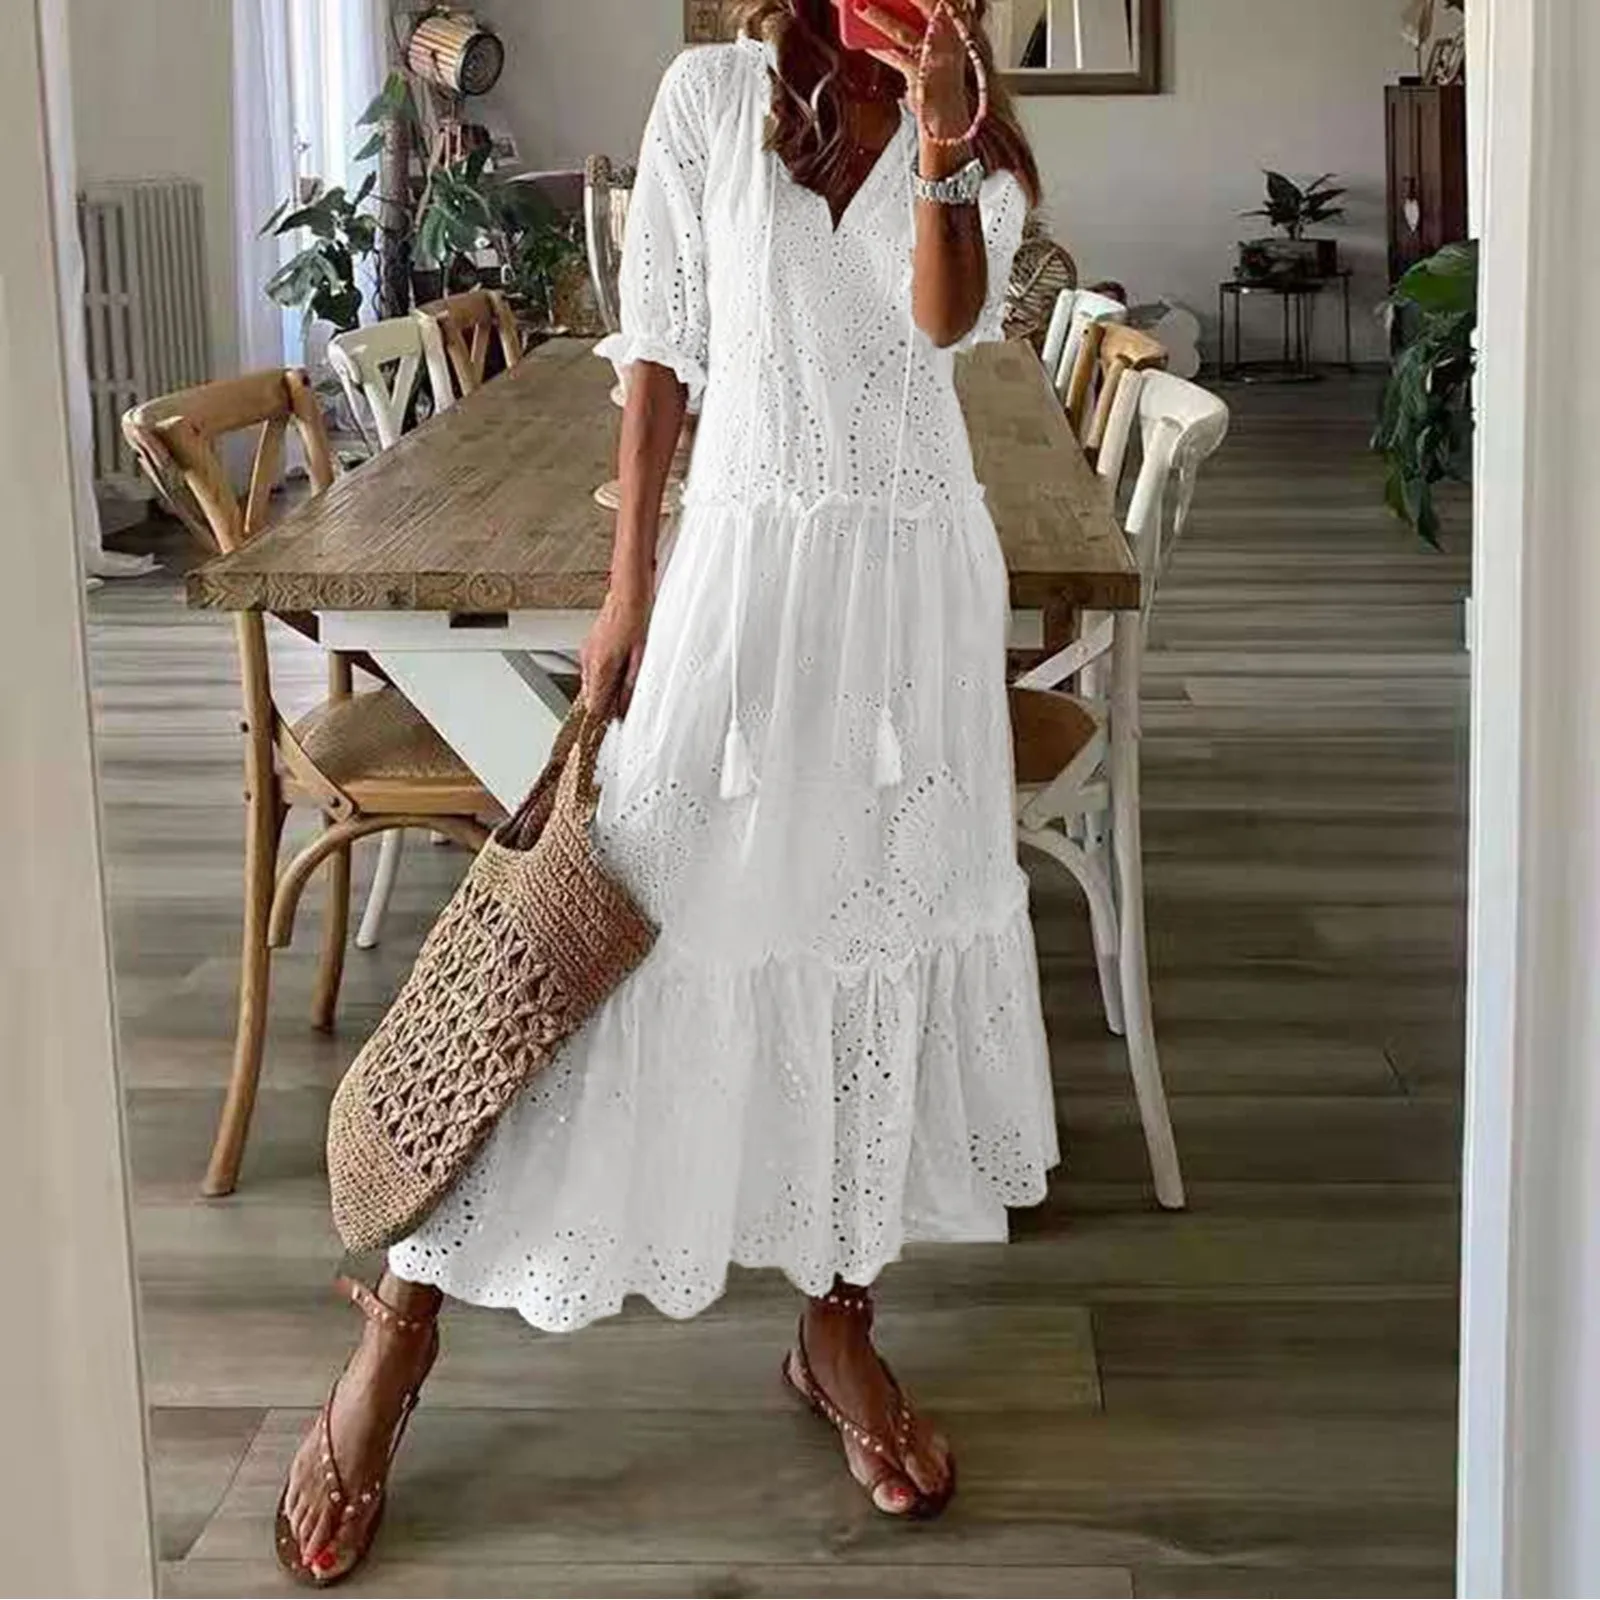 

Casual Hollow Out V Neck White Lace Maxi Dress Vintage A-line Loose Embrioderied Floral Print Bohemian Long Sundress For Women